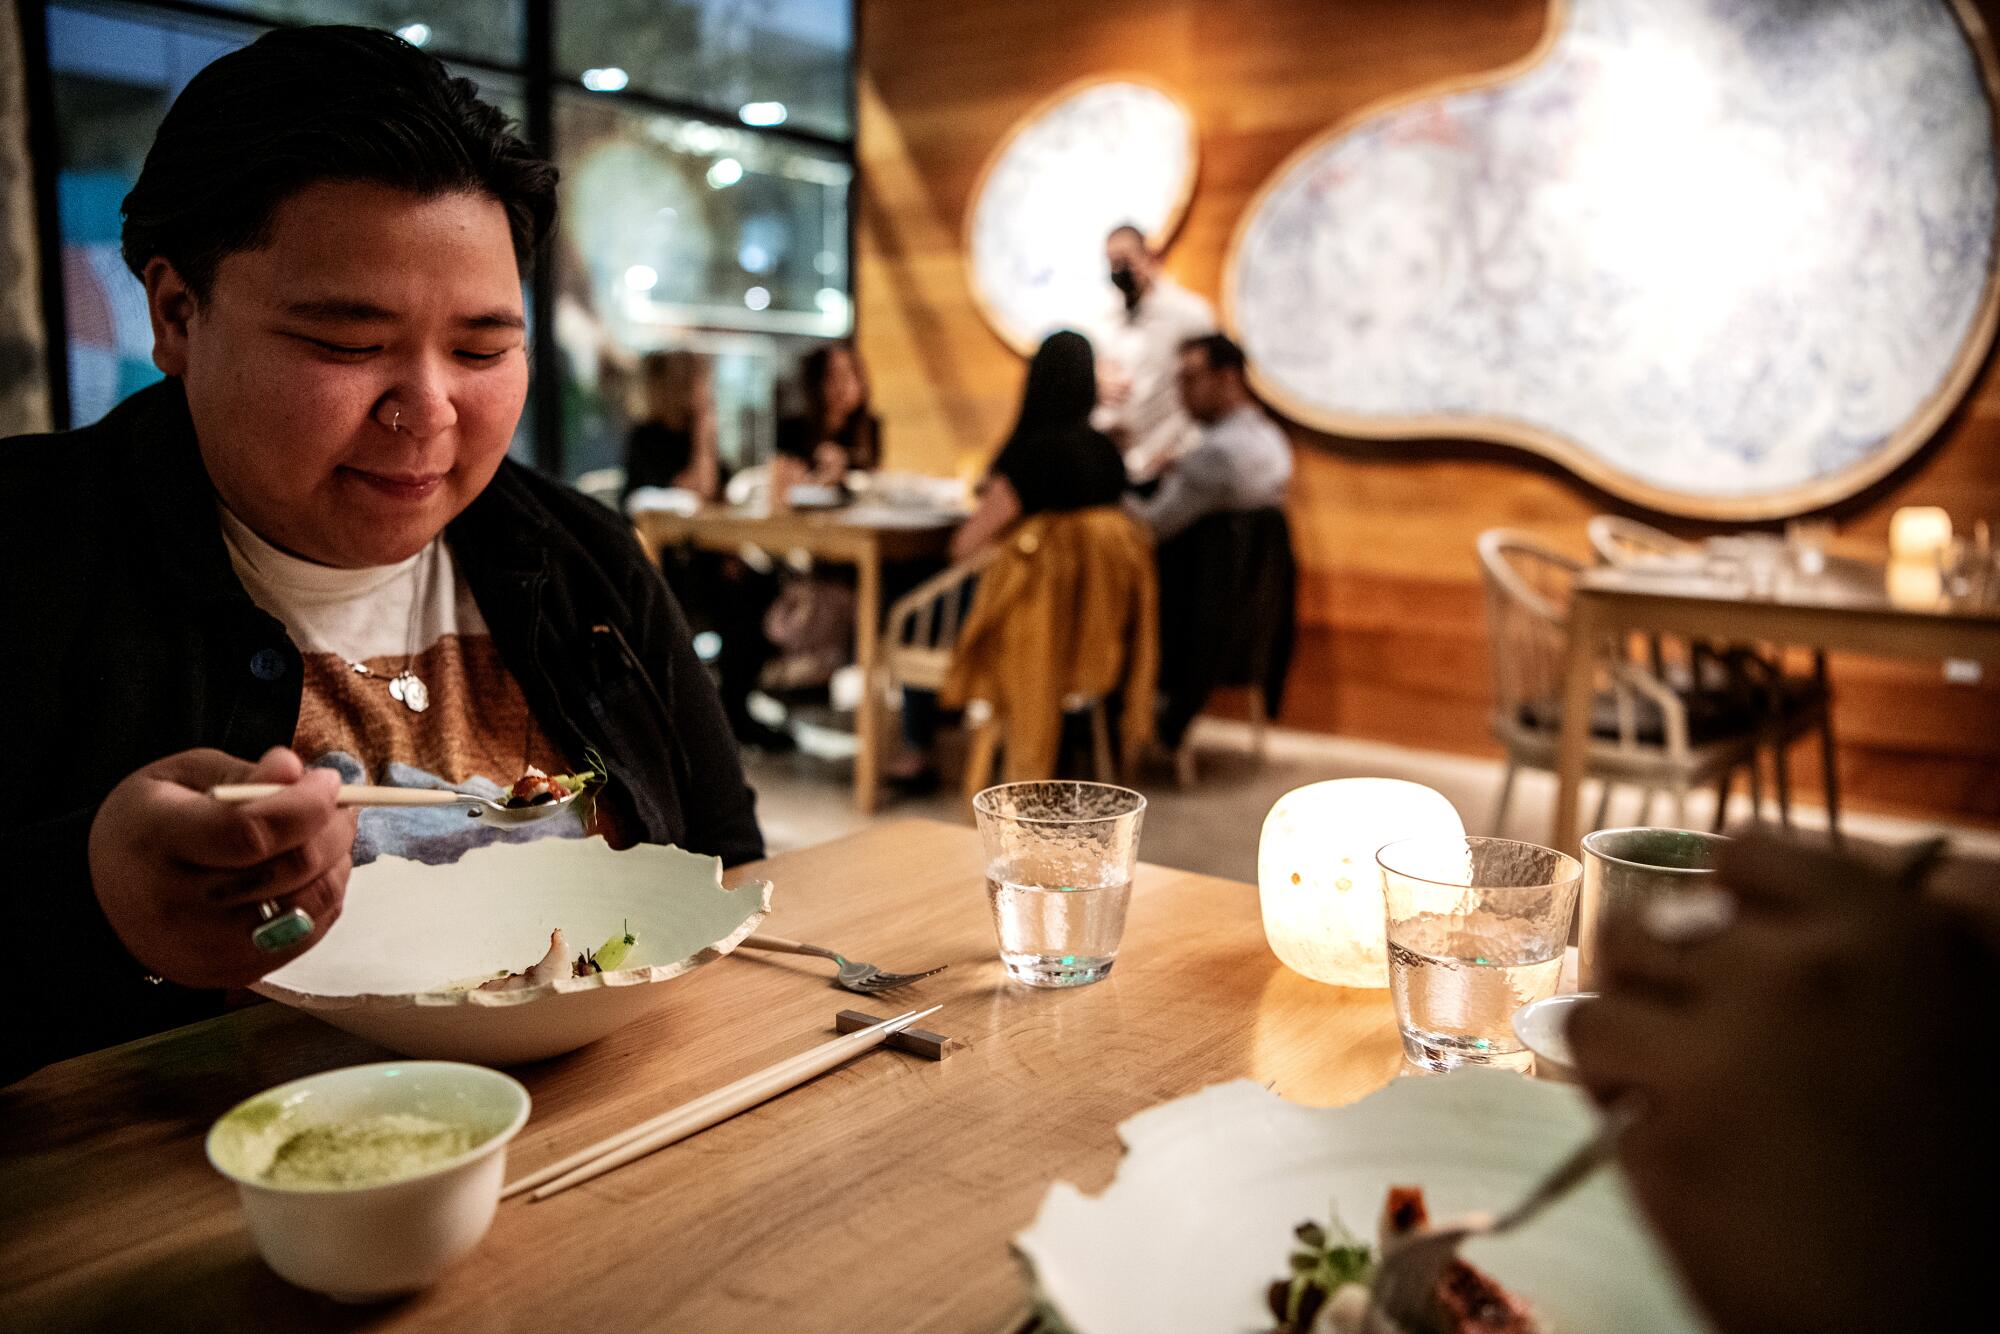 A person eats at a wooden table, with other diners in the background, at Kato in L.A.